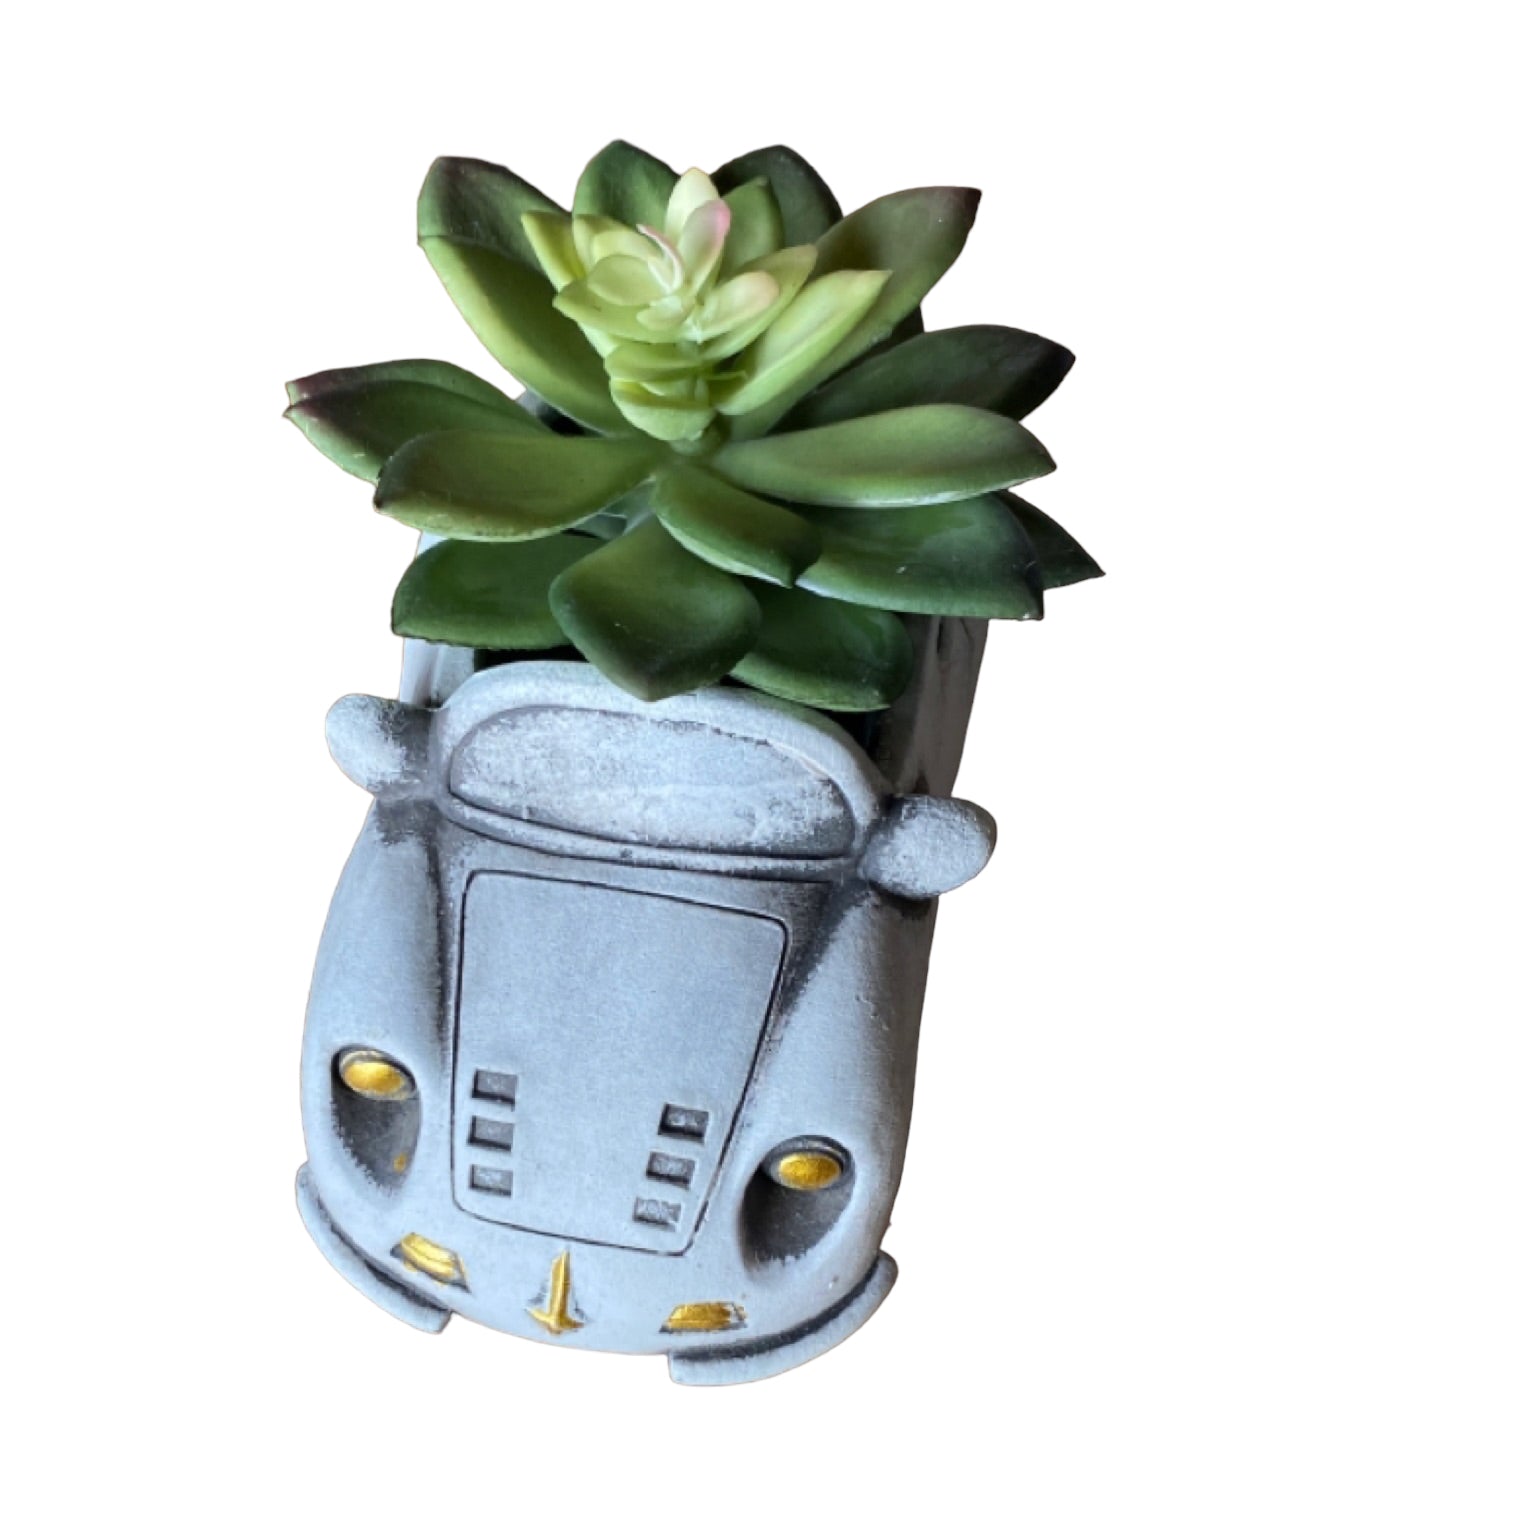 Car Convertible Planter Pot - The Renmy Store Homewares & Gifts 